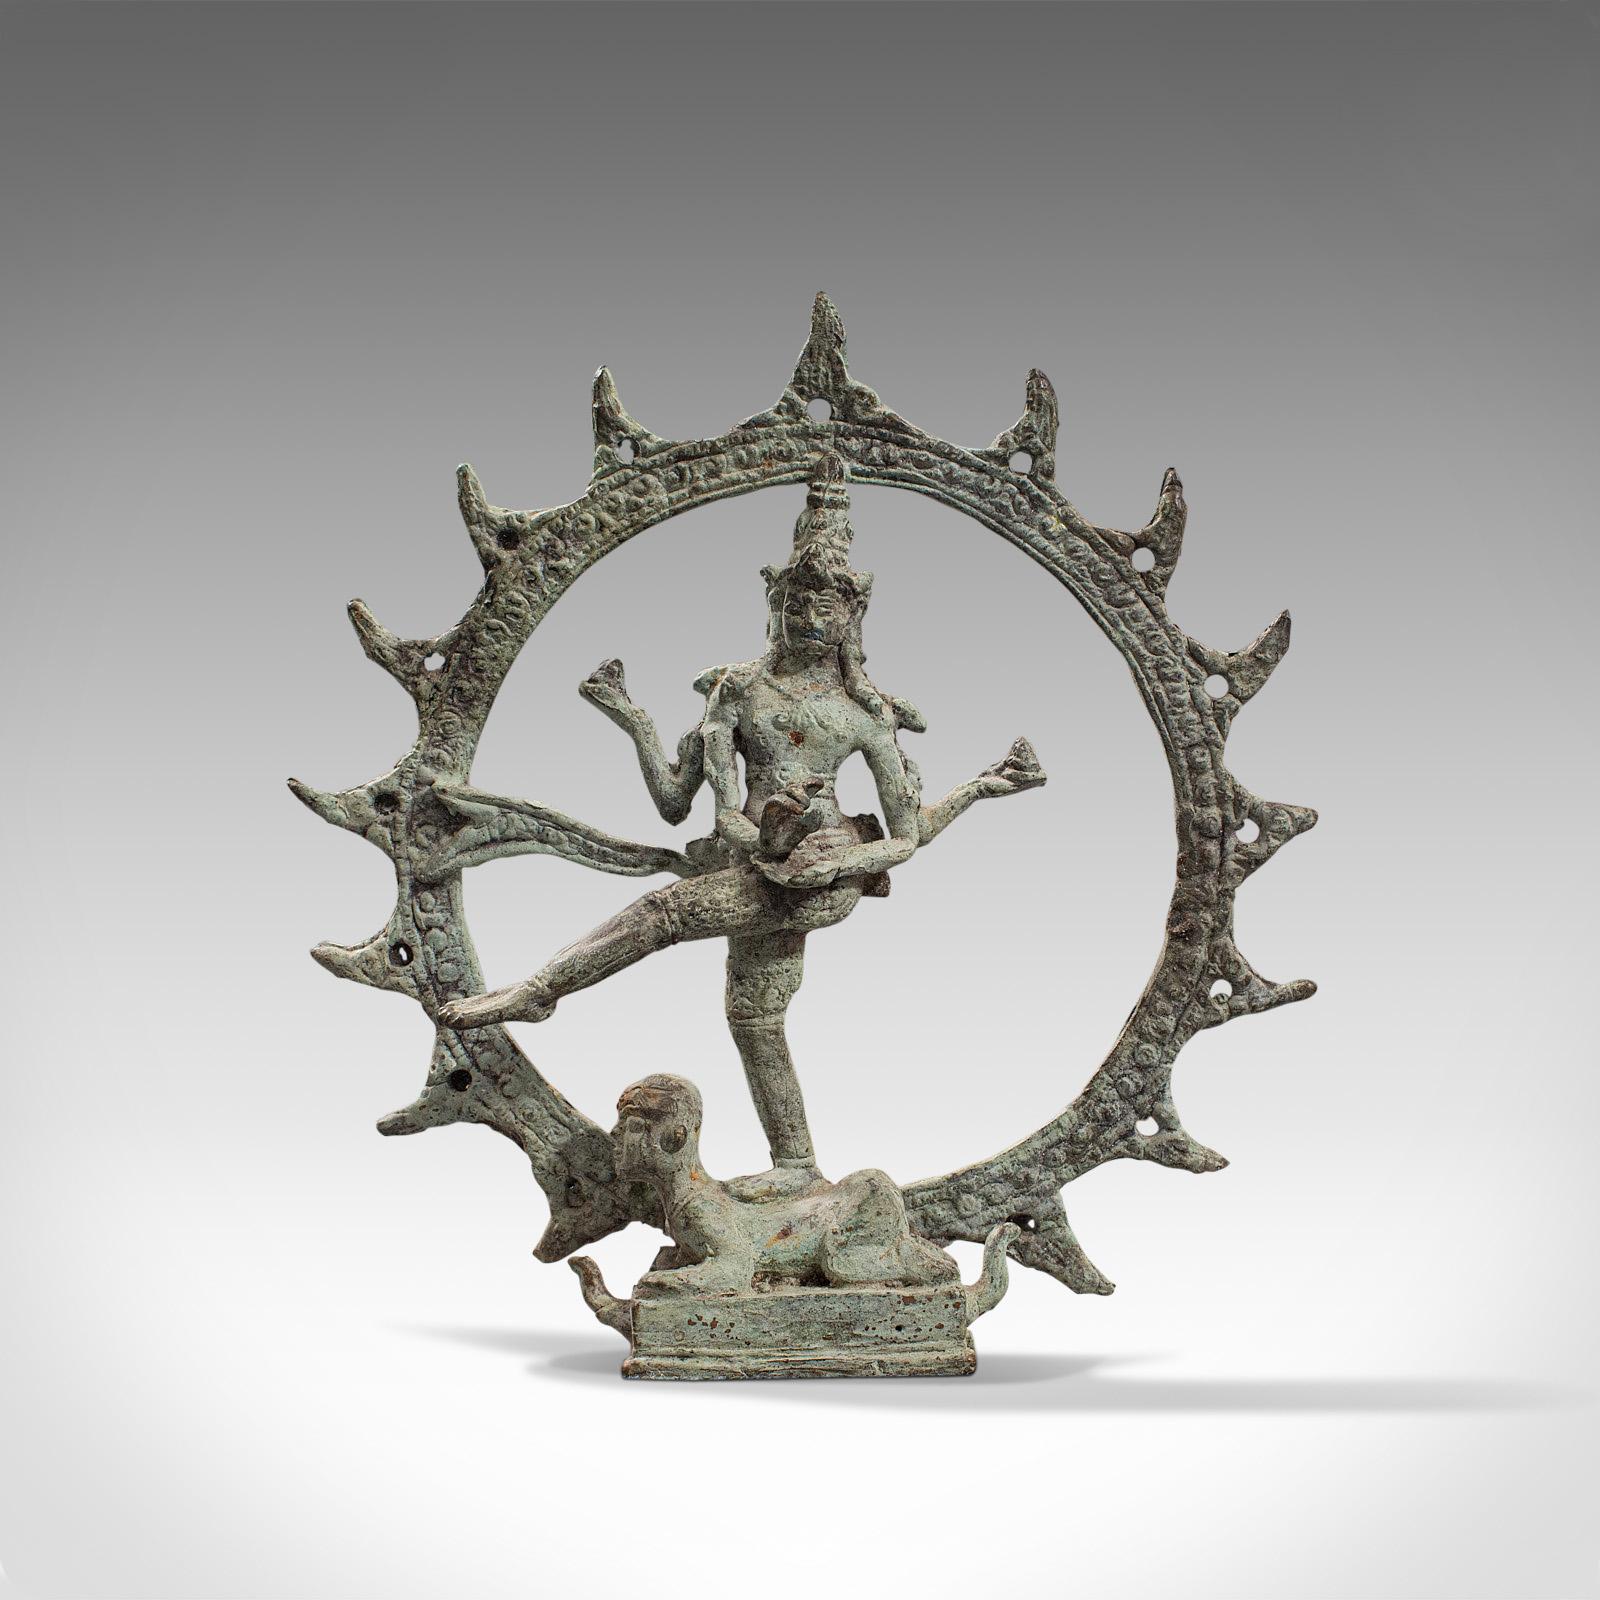 This is a beguiling antique Shiva Nataraja figure. An Indian, bronze mystic statue standing upon Apasmarapurusa or the 'Dwarf of Ignorance', dating to the 17th century.

Centuries old and beautifully aged, this figure depicts Shiva as the lord of